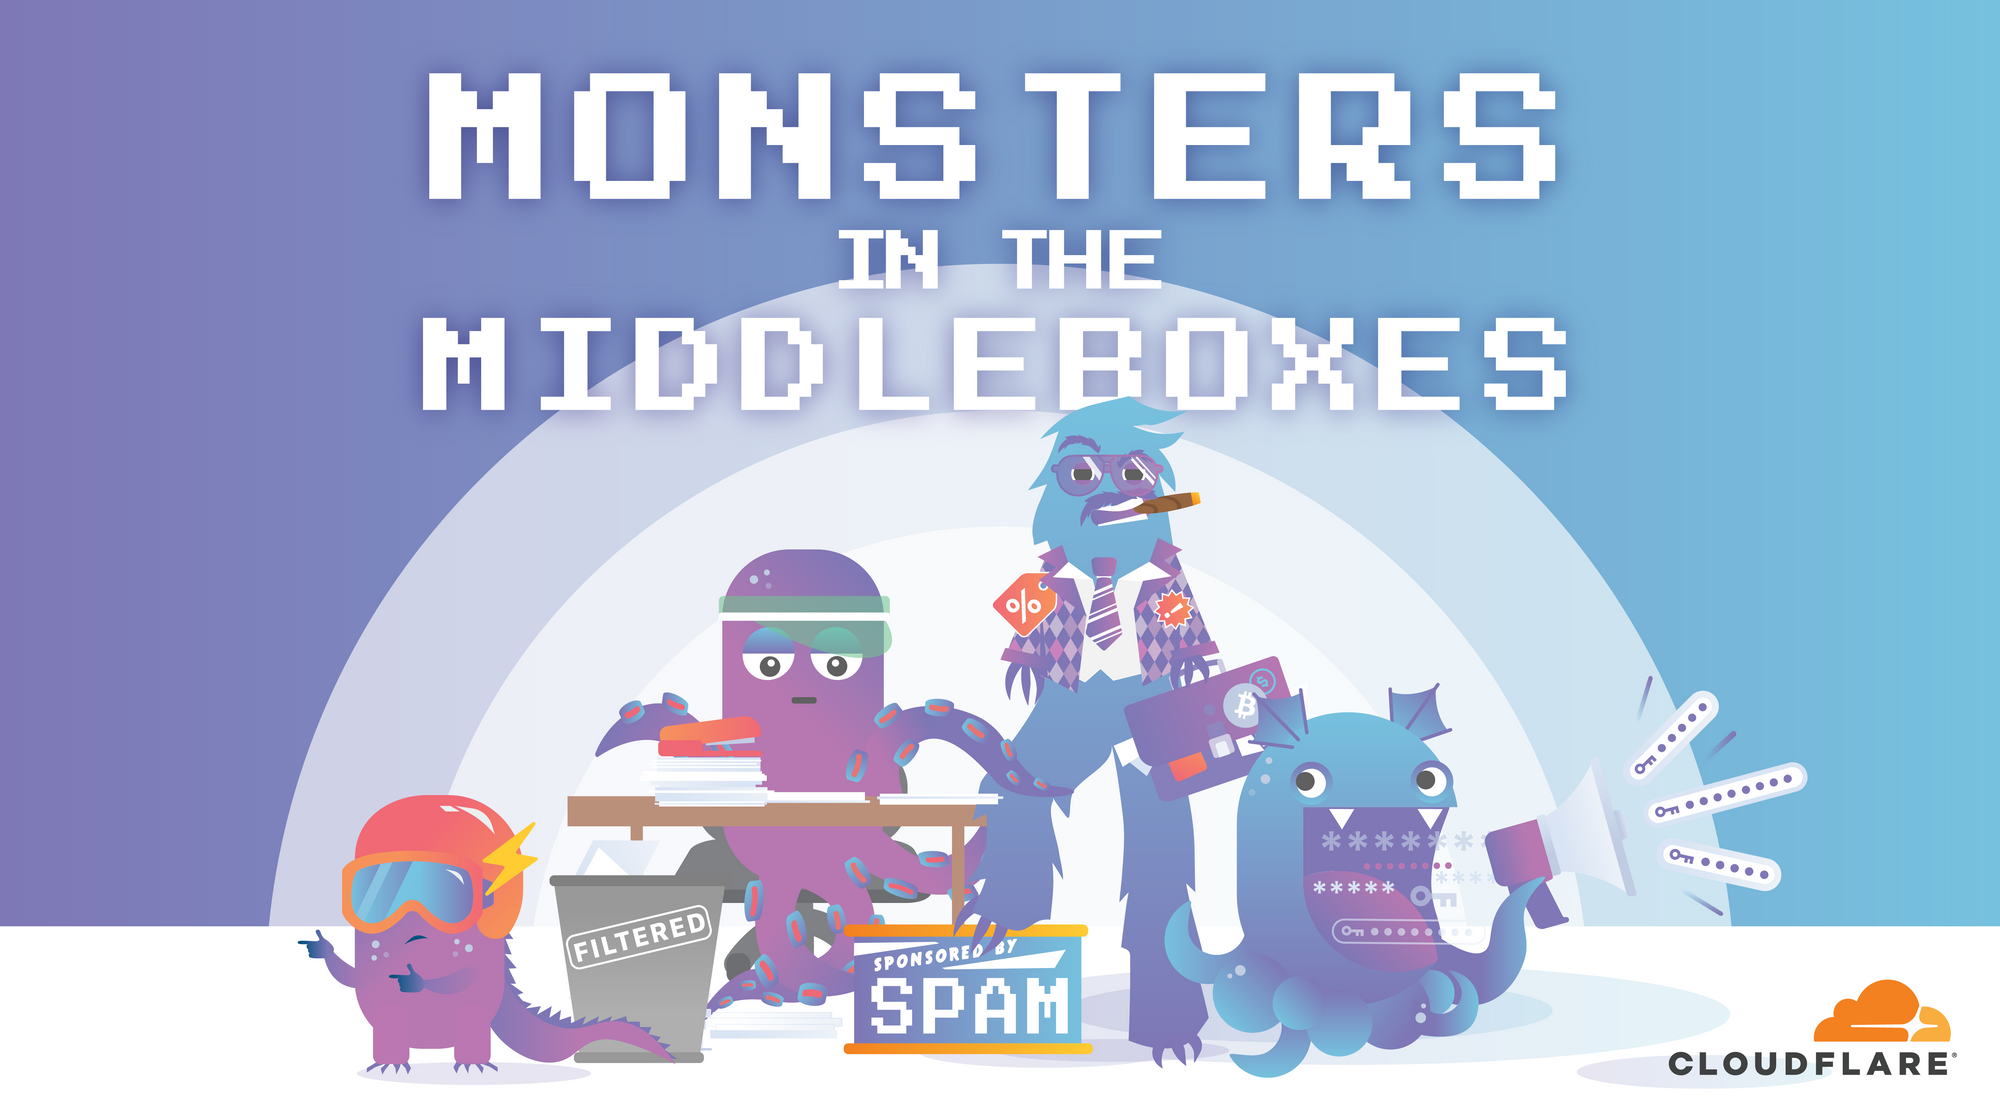 monsters-in-the-middleware@2x.png